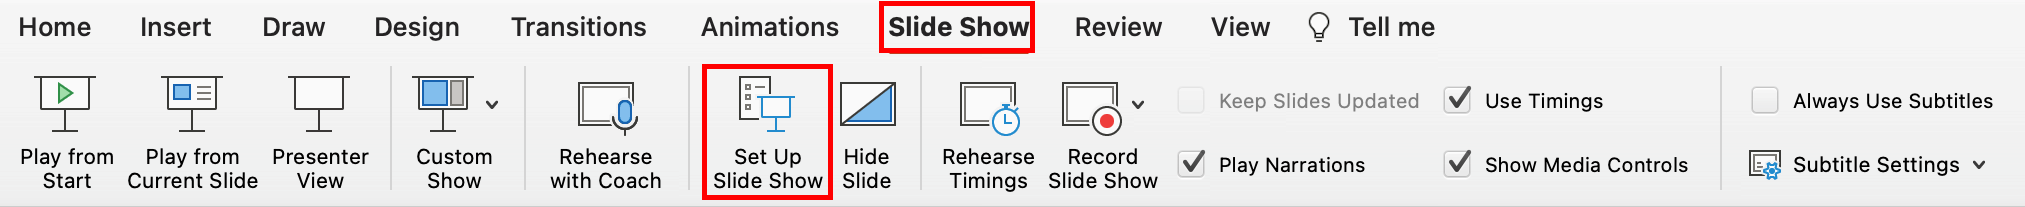 Top toolbar, PowerPoint for Mac. On it, the Slide Show tab is selected and highlighted by a red box. On the Slide Show ribbon, the button "Set Up Slide Show" is highlighted by a red box.